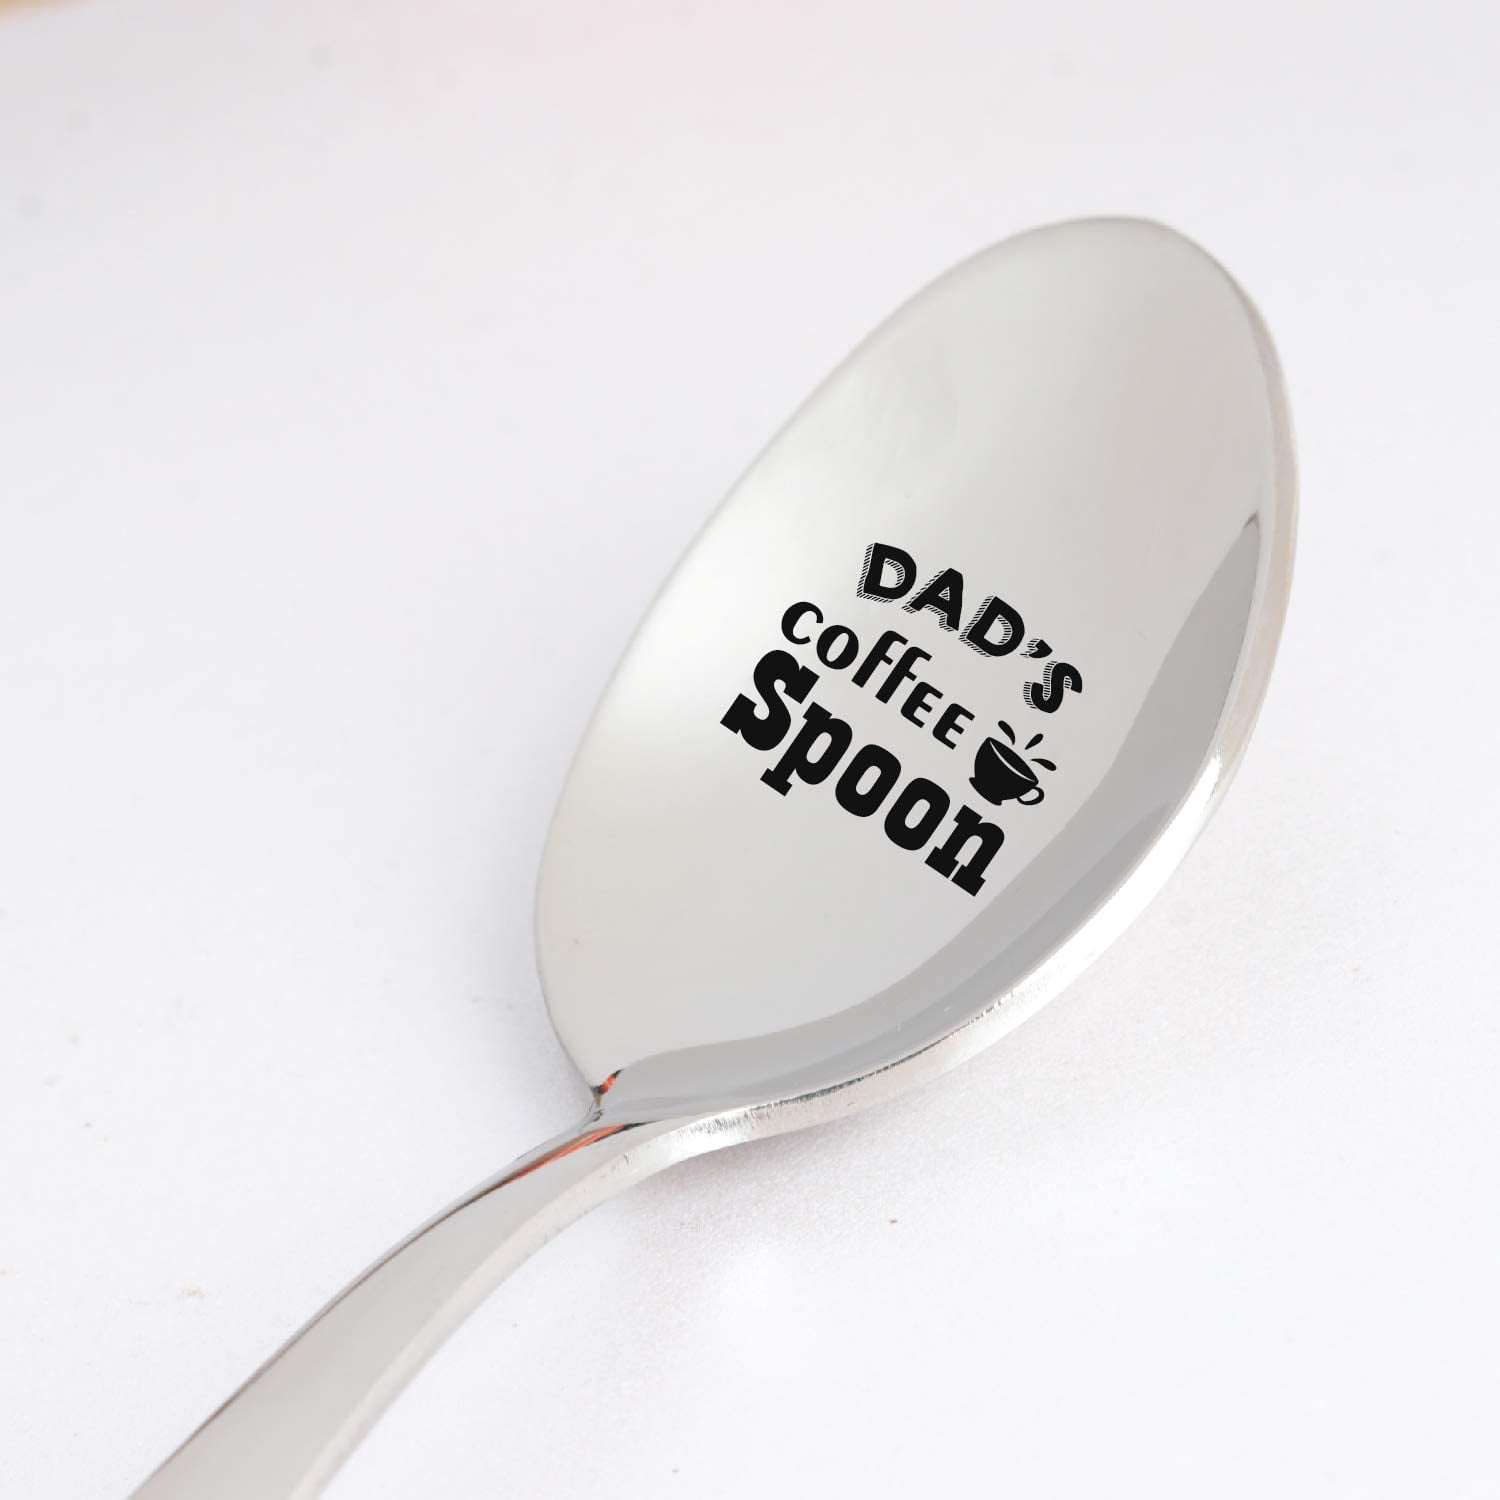 Best Brother Gifts from Sister Funny Good Morning Brother Spoon Perfect Fathers Day/Birthday/Christmas Gifts Tea Coffee Spoon Funny Brother Spoon Engraved Stainless Steel 